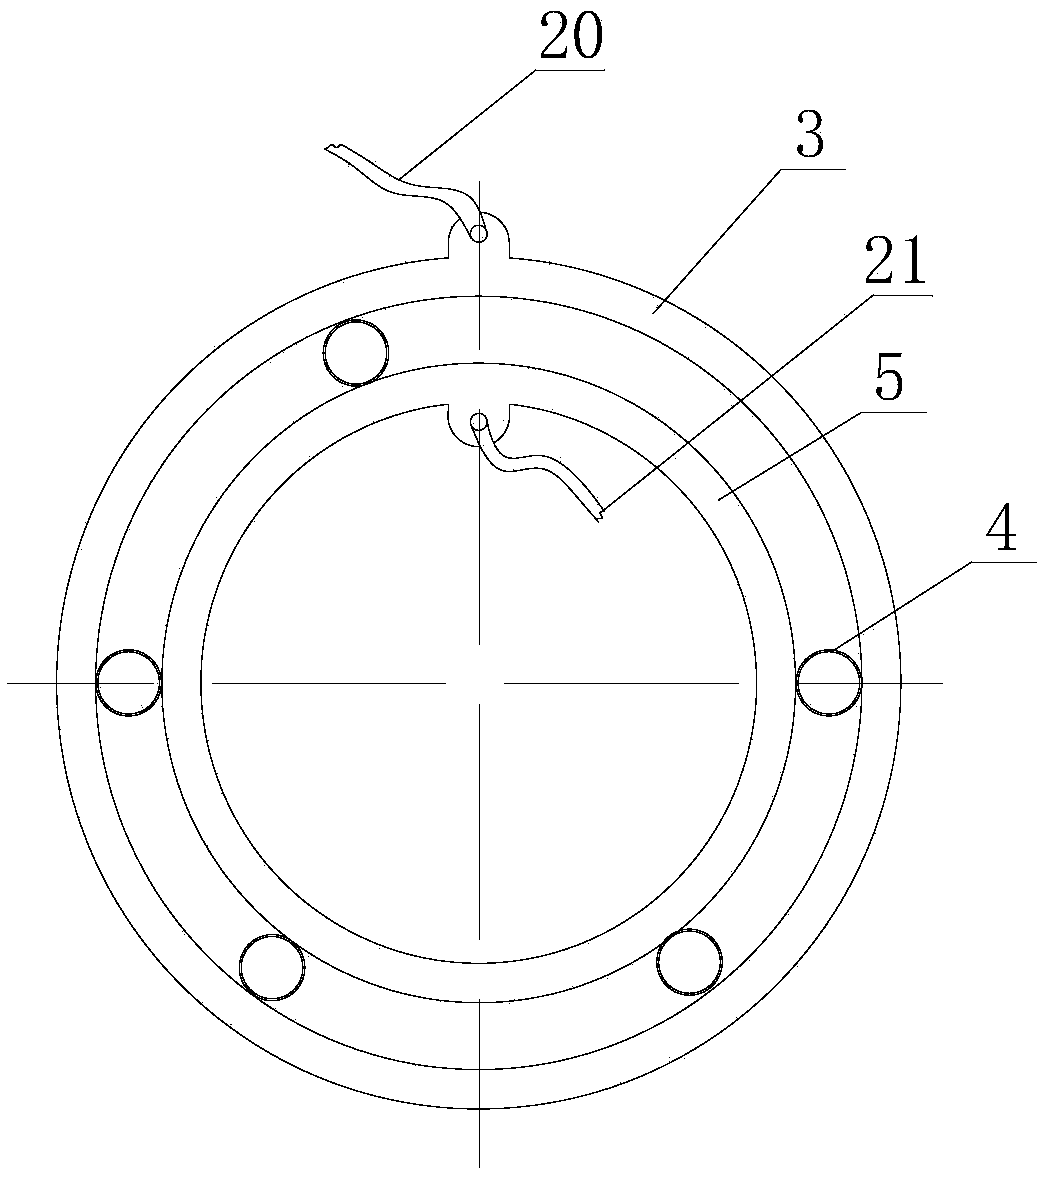 Rolling contact rotary electrical connector